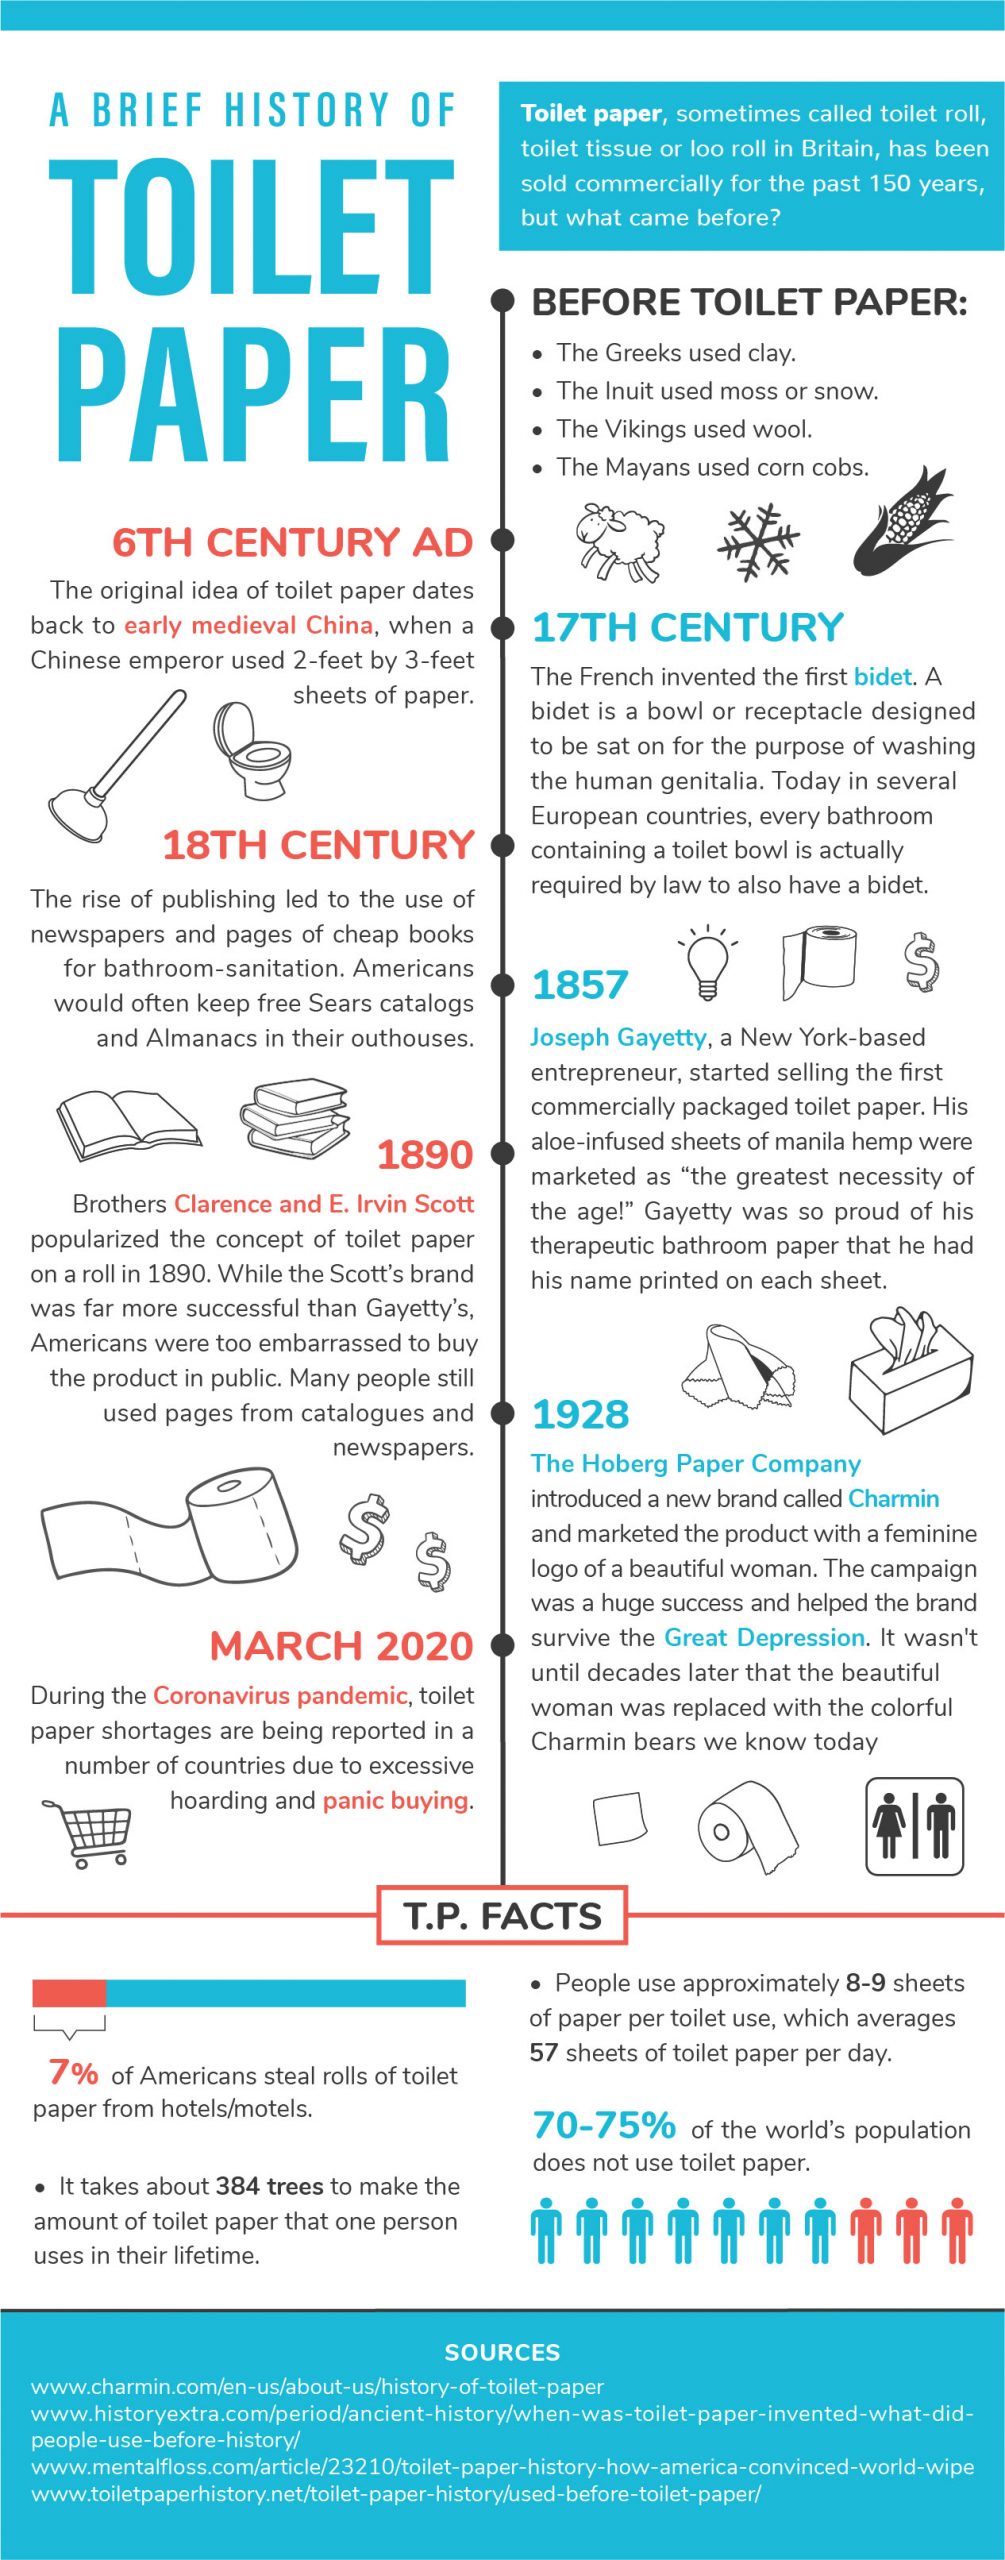 Infographic: The Greatest Inventions of All Time